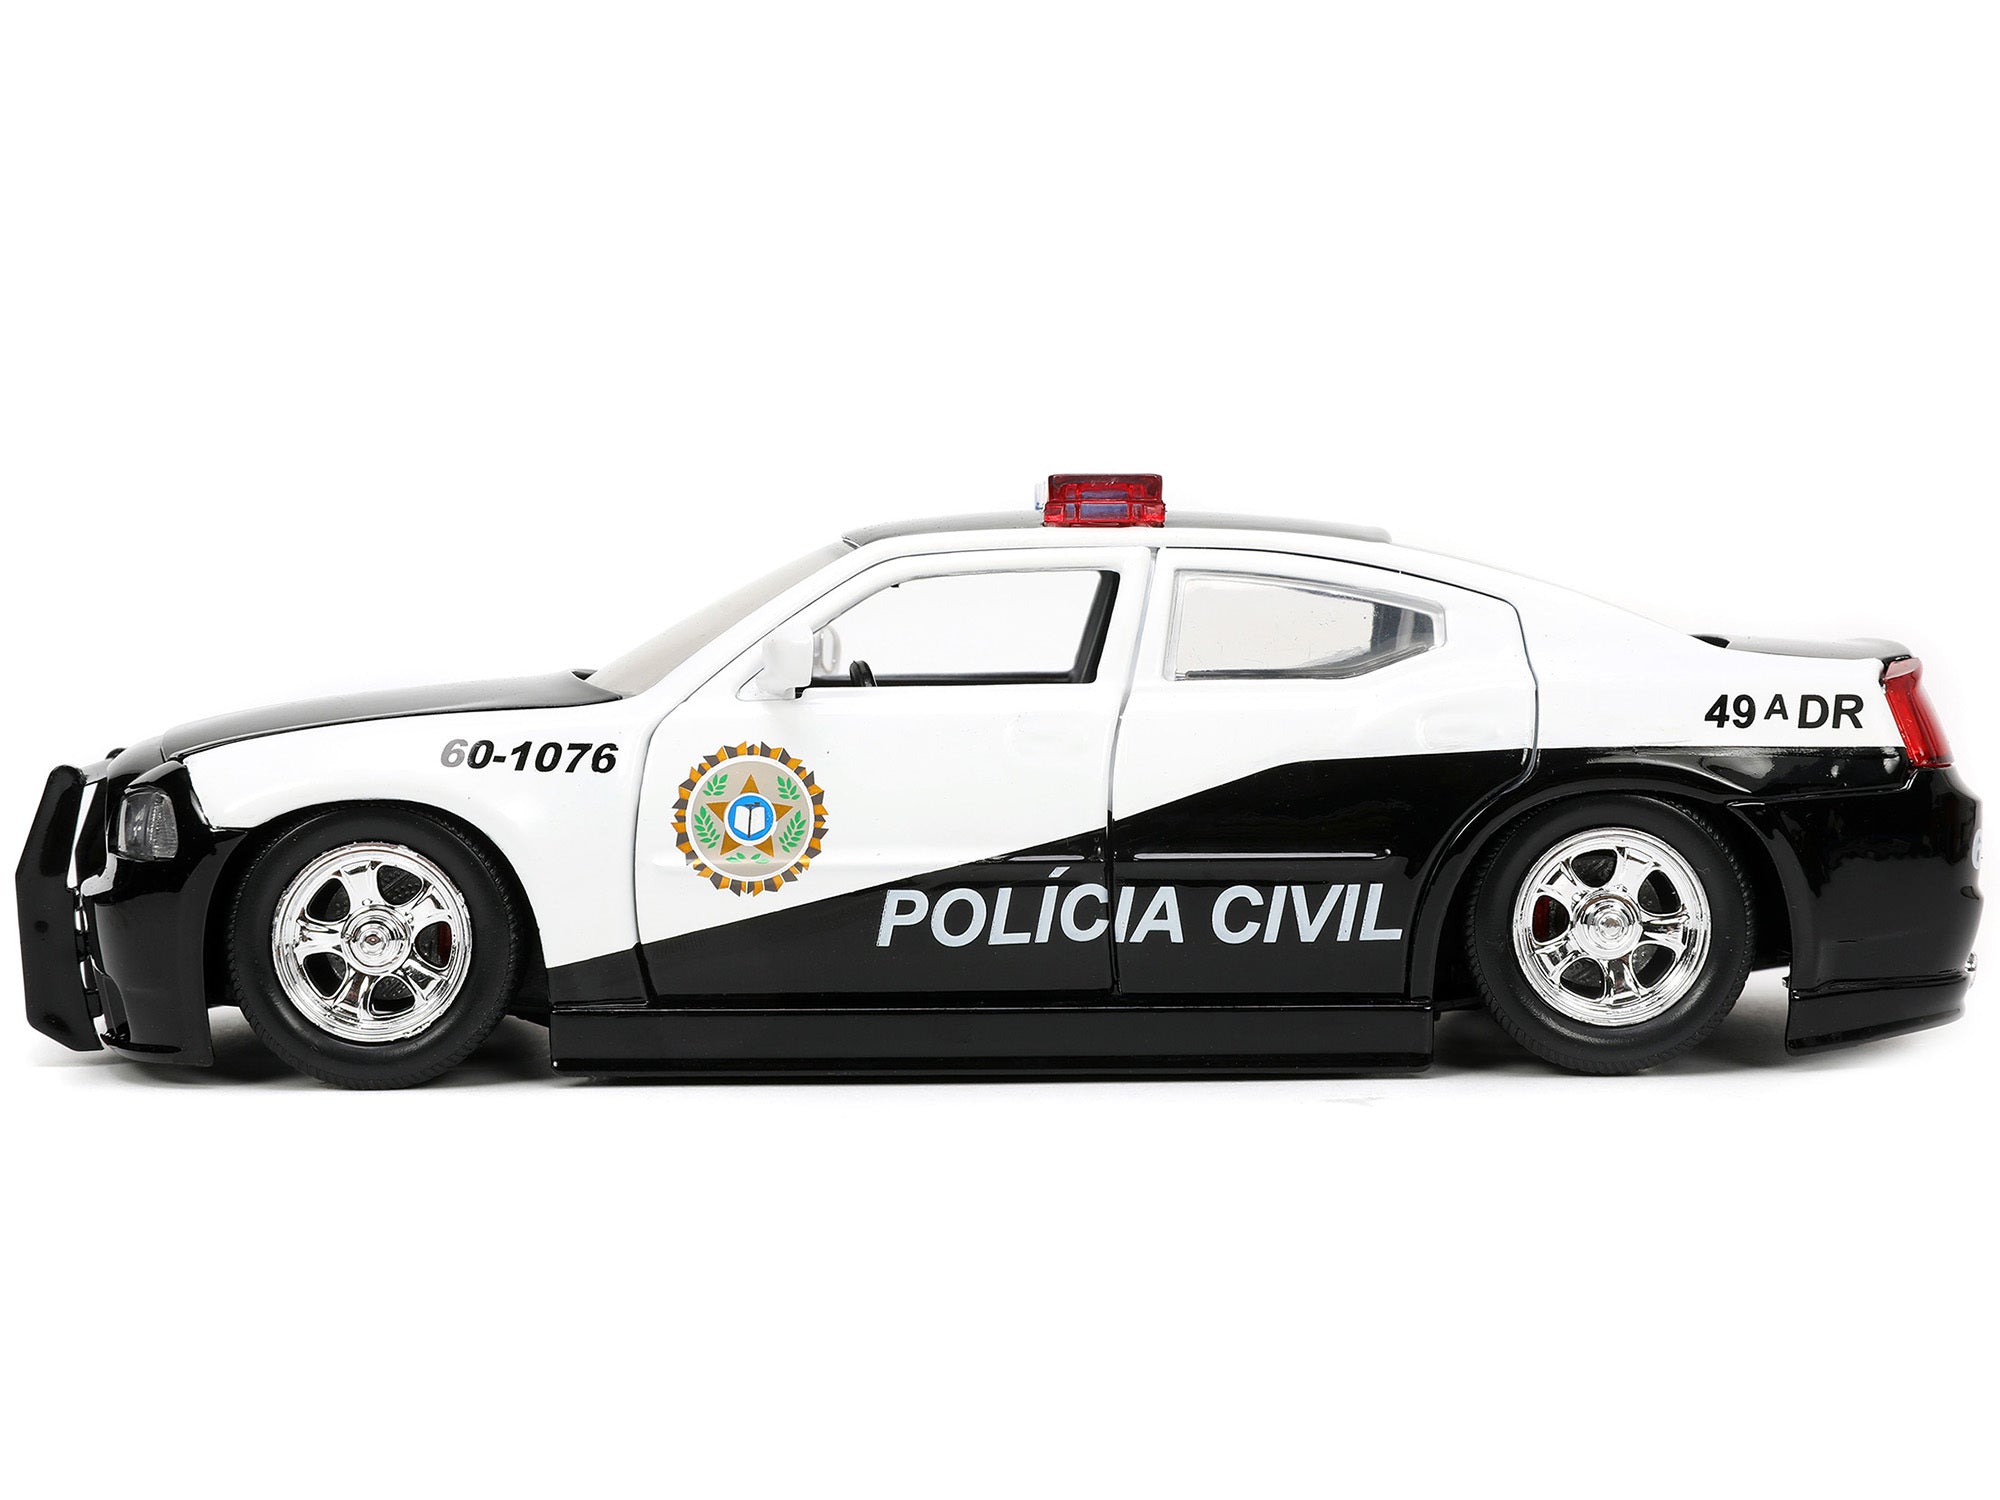 2006 Dodge Charger Police Black and White "Policia Civil" "Fast & Furious" Series 1/24 Diecast Model Car by Jada